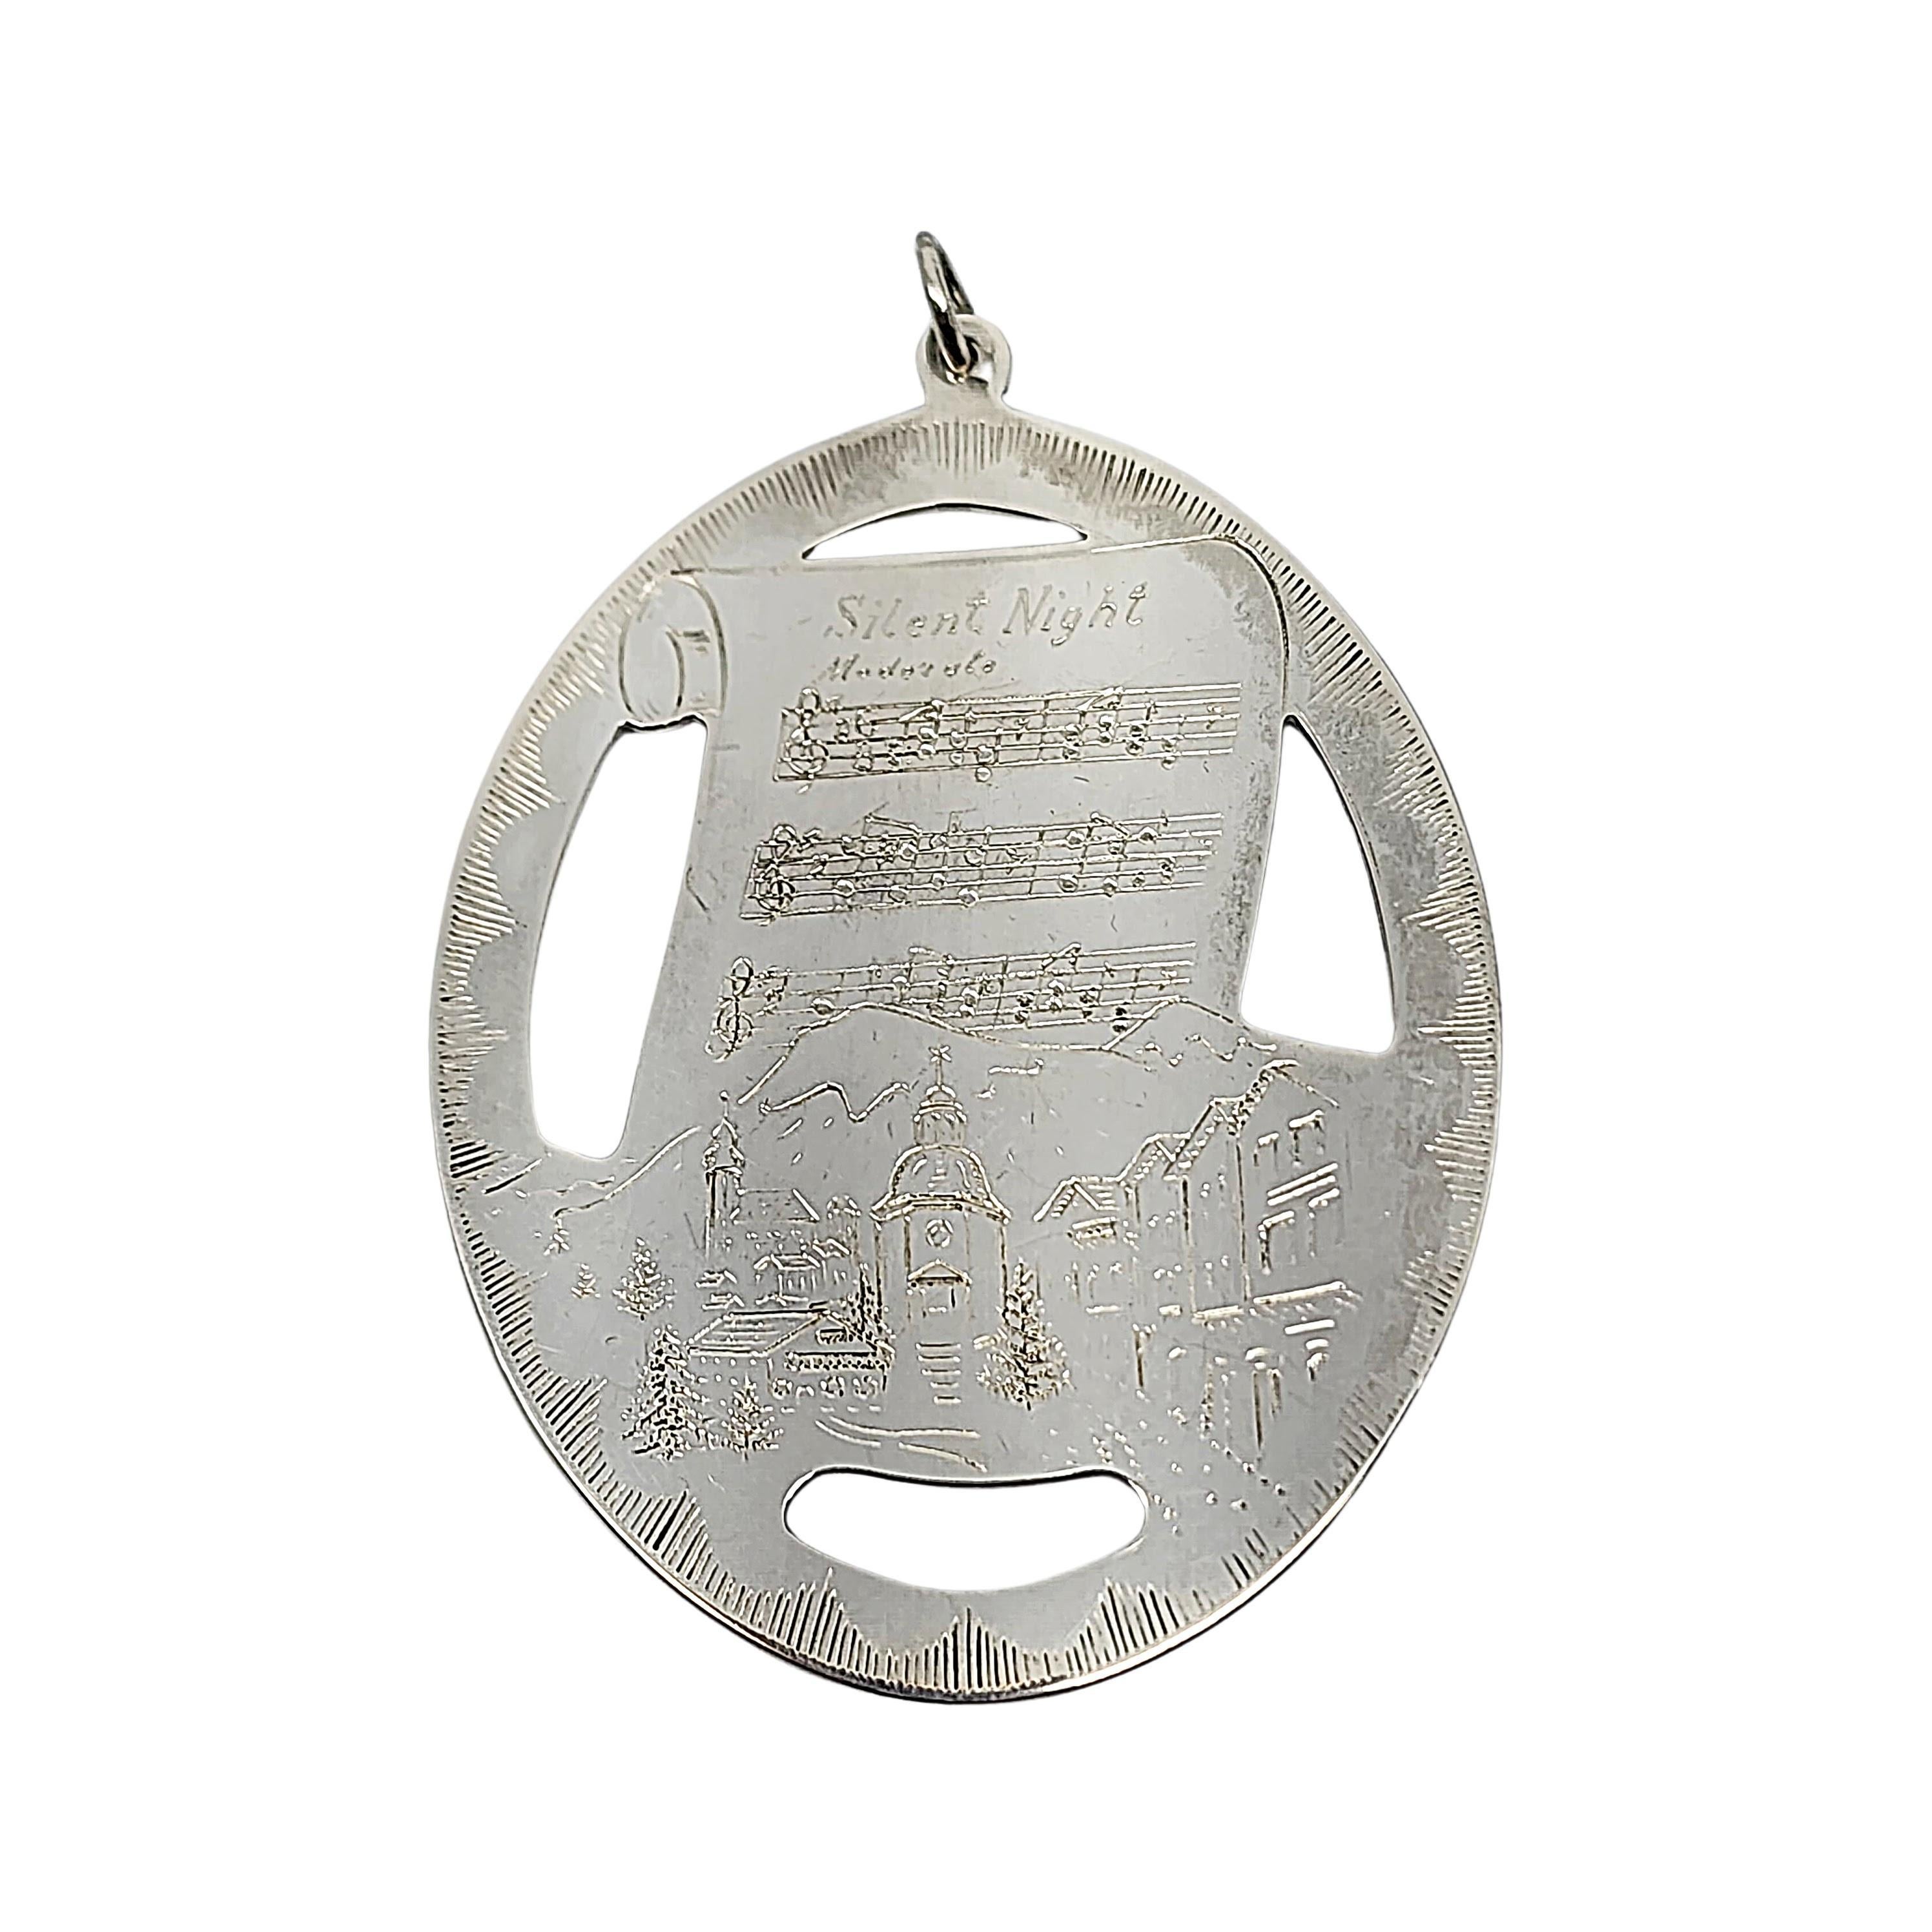 Lunt sterling silver Silent Night medallion ornament from 1977, with box and pouch.

This Silent Night ornament was second in Lunt's collection of Sterling Silver Christmas Medallions featuring The Music of Christmas. One side is etched with Silent